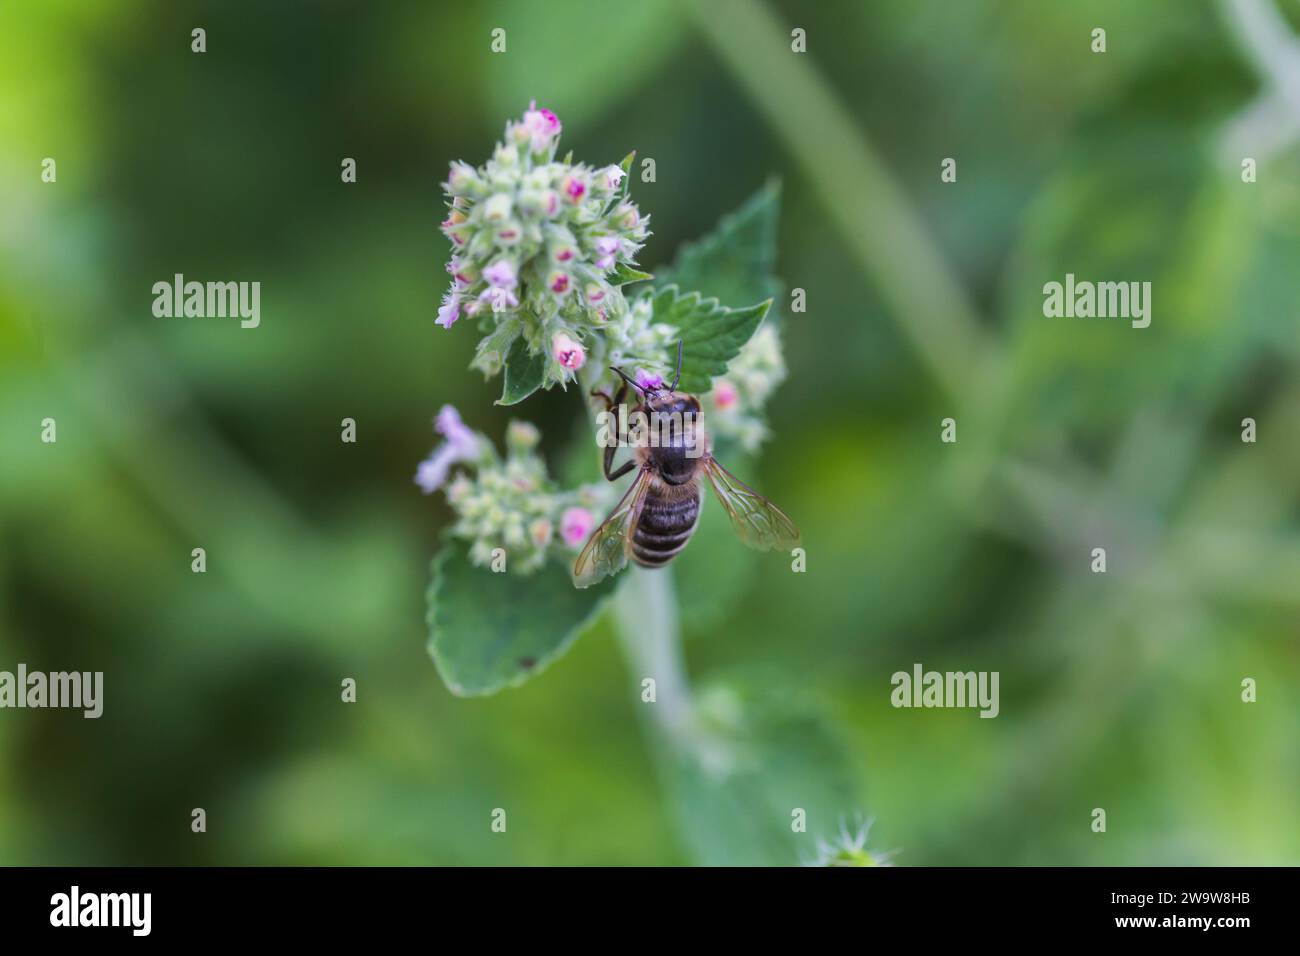 Lamium album, white nettle, white dead-nettle purple flowers. Honeybees collect nectar from the blooming Lamium album. Copy space Stock Photo